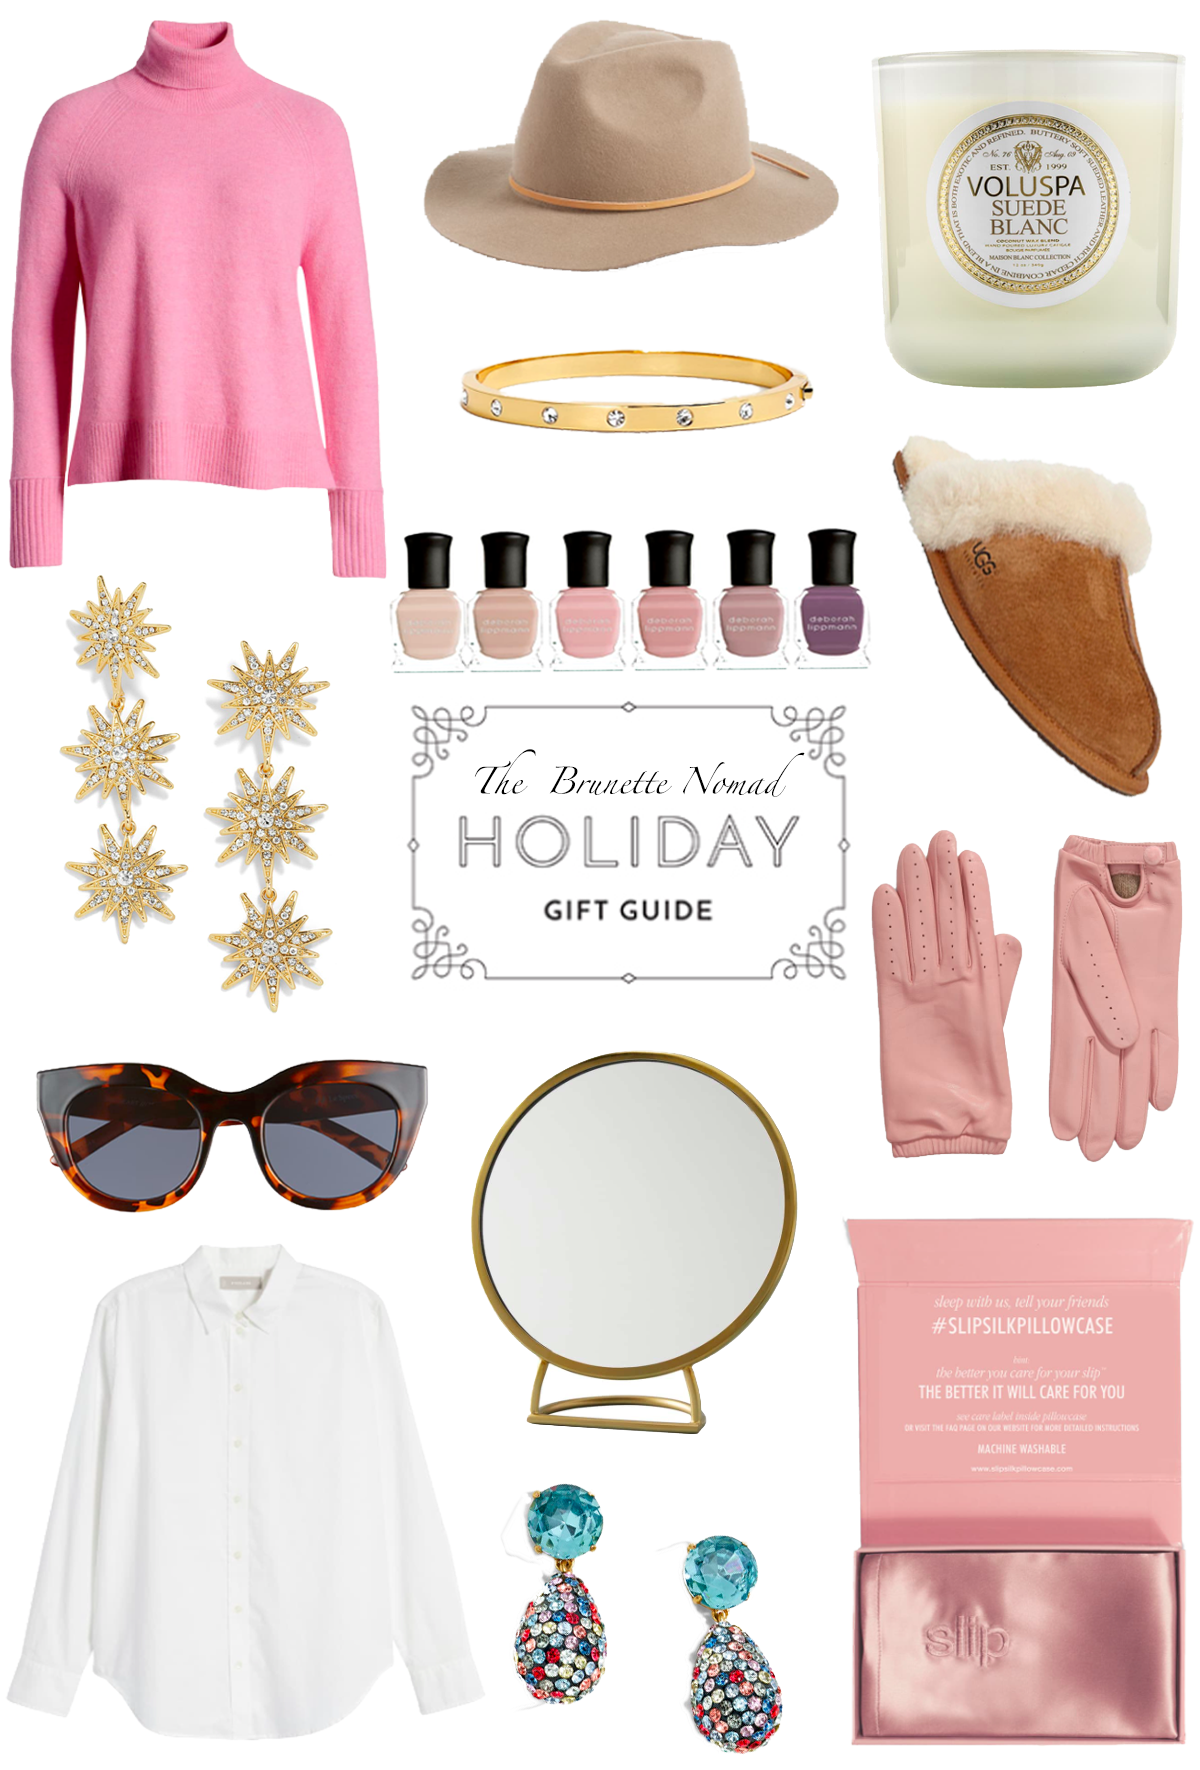 holiday gift guide collage for her under $100